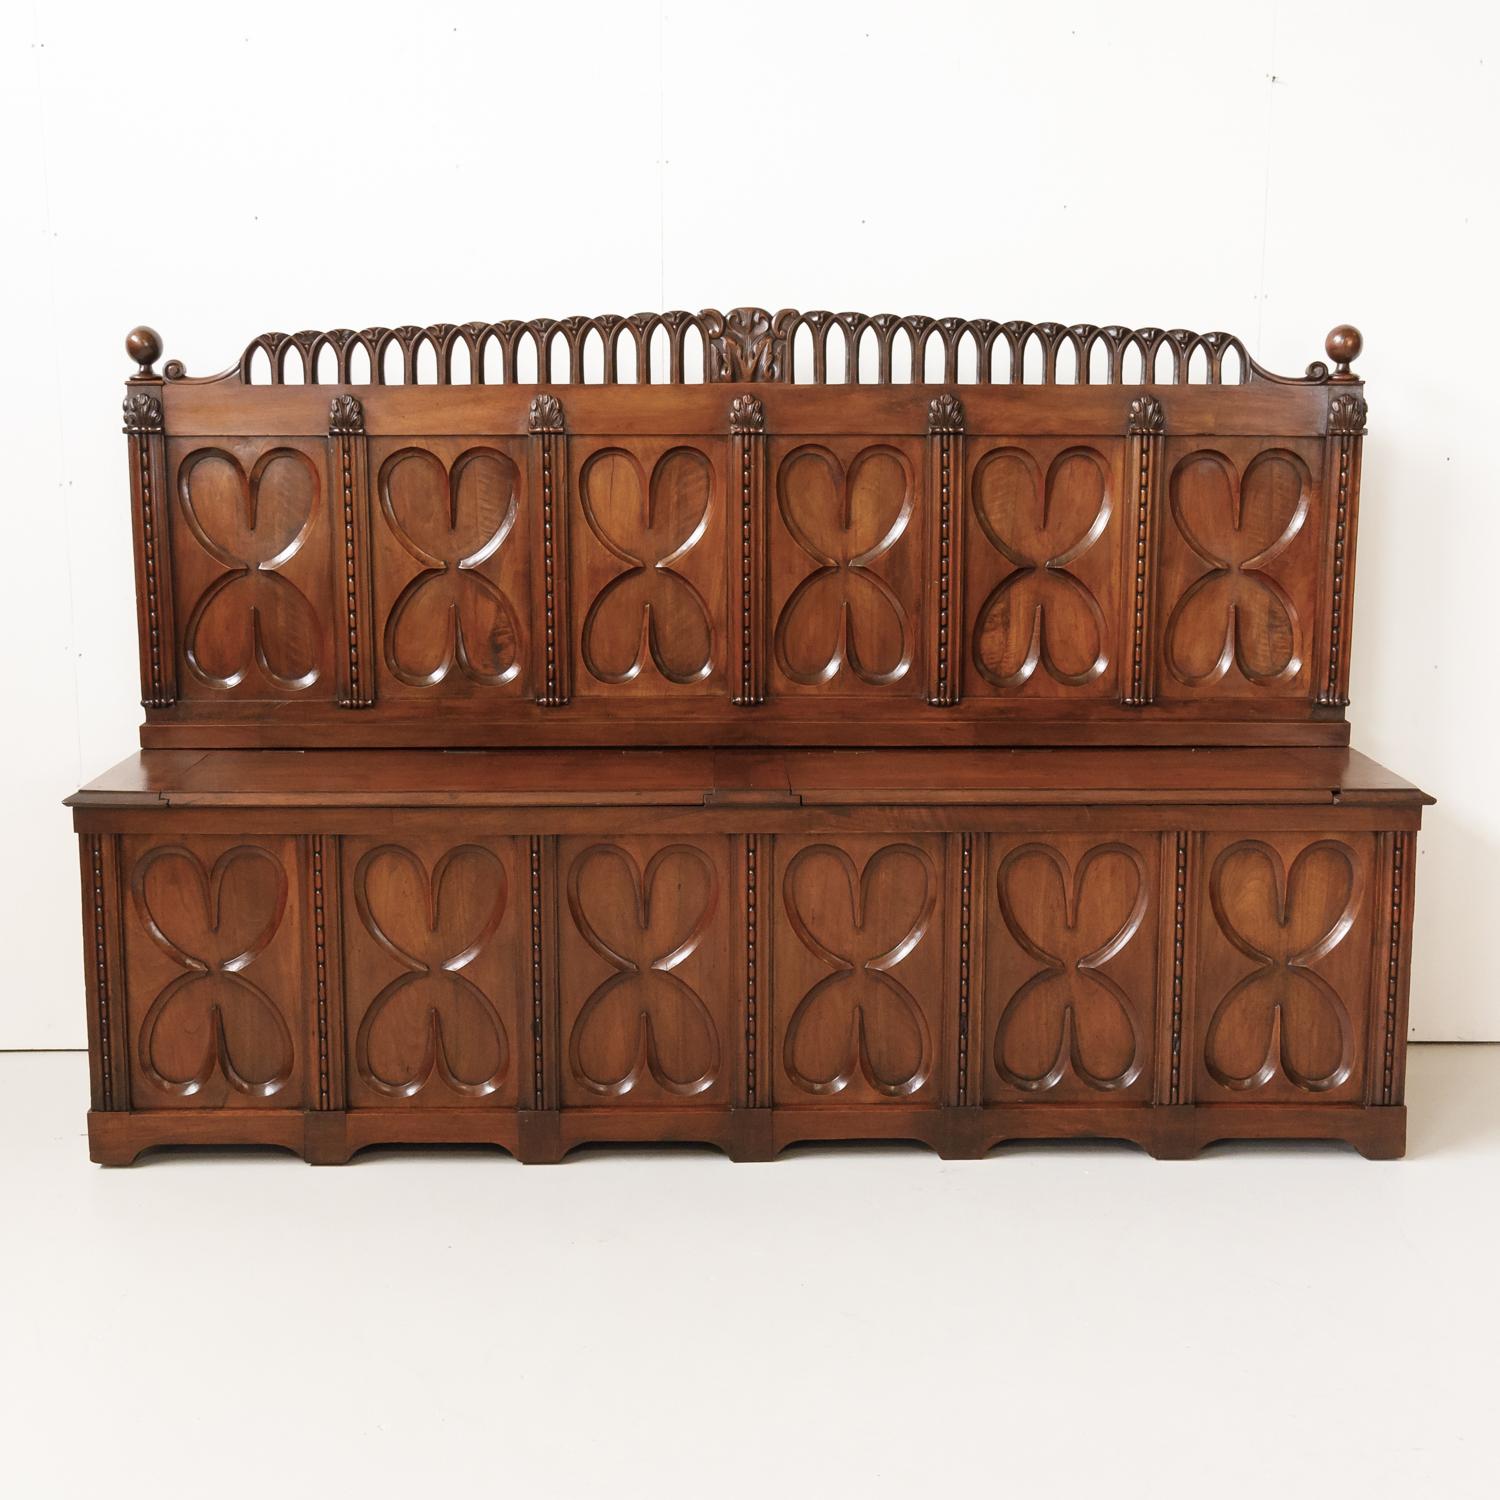 18th century French Gothic Revival period chateau settle with double lift seat handcrafted of solid old growth French walnut by talented artisans in Lyon, circa 1760s. This intricately carved hall bench features six high relief hand carved panels on